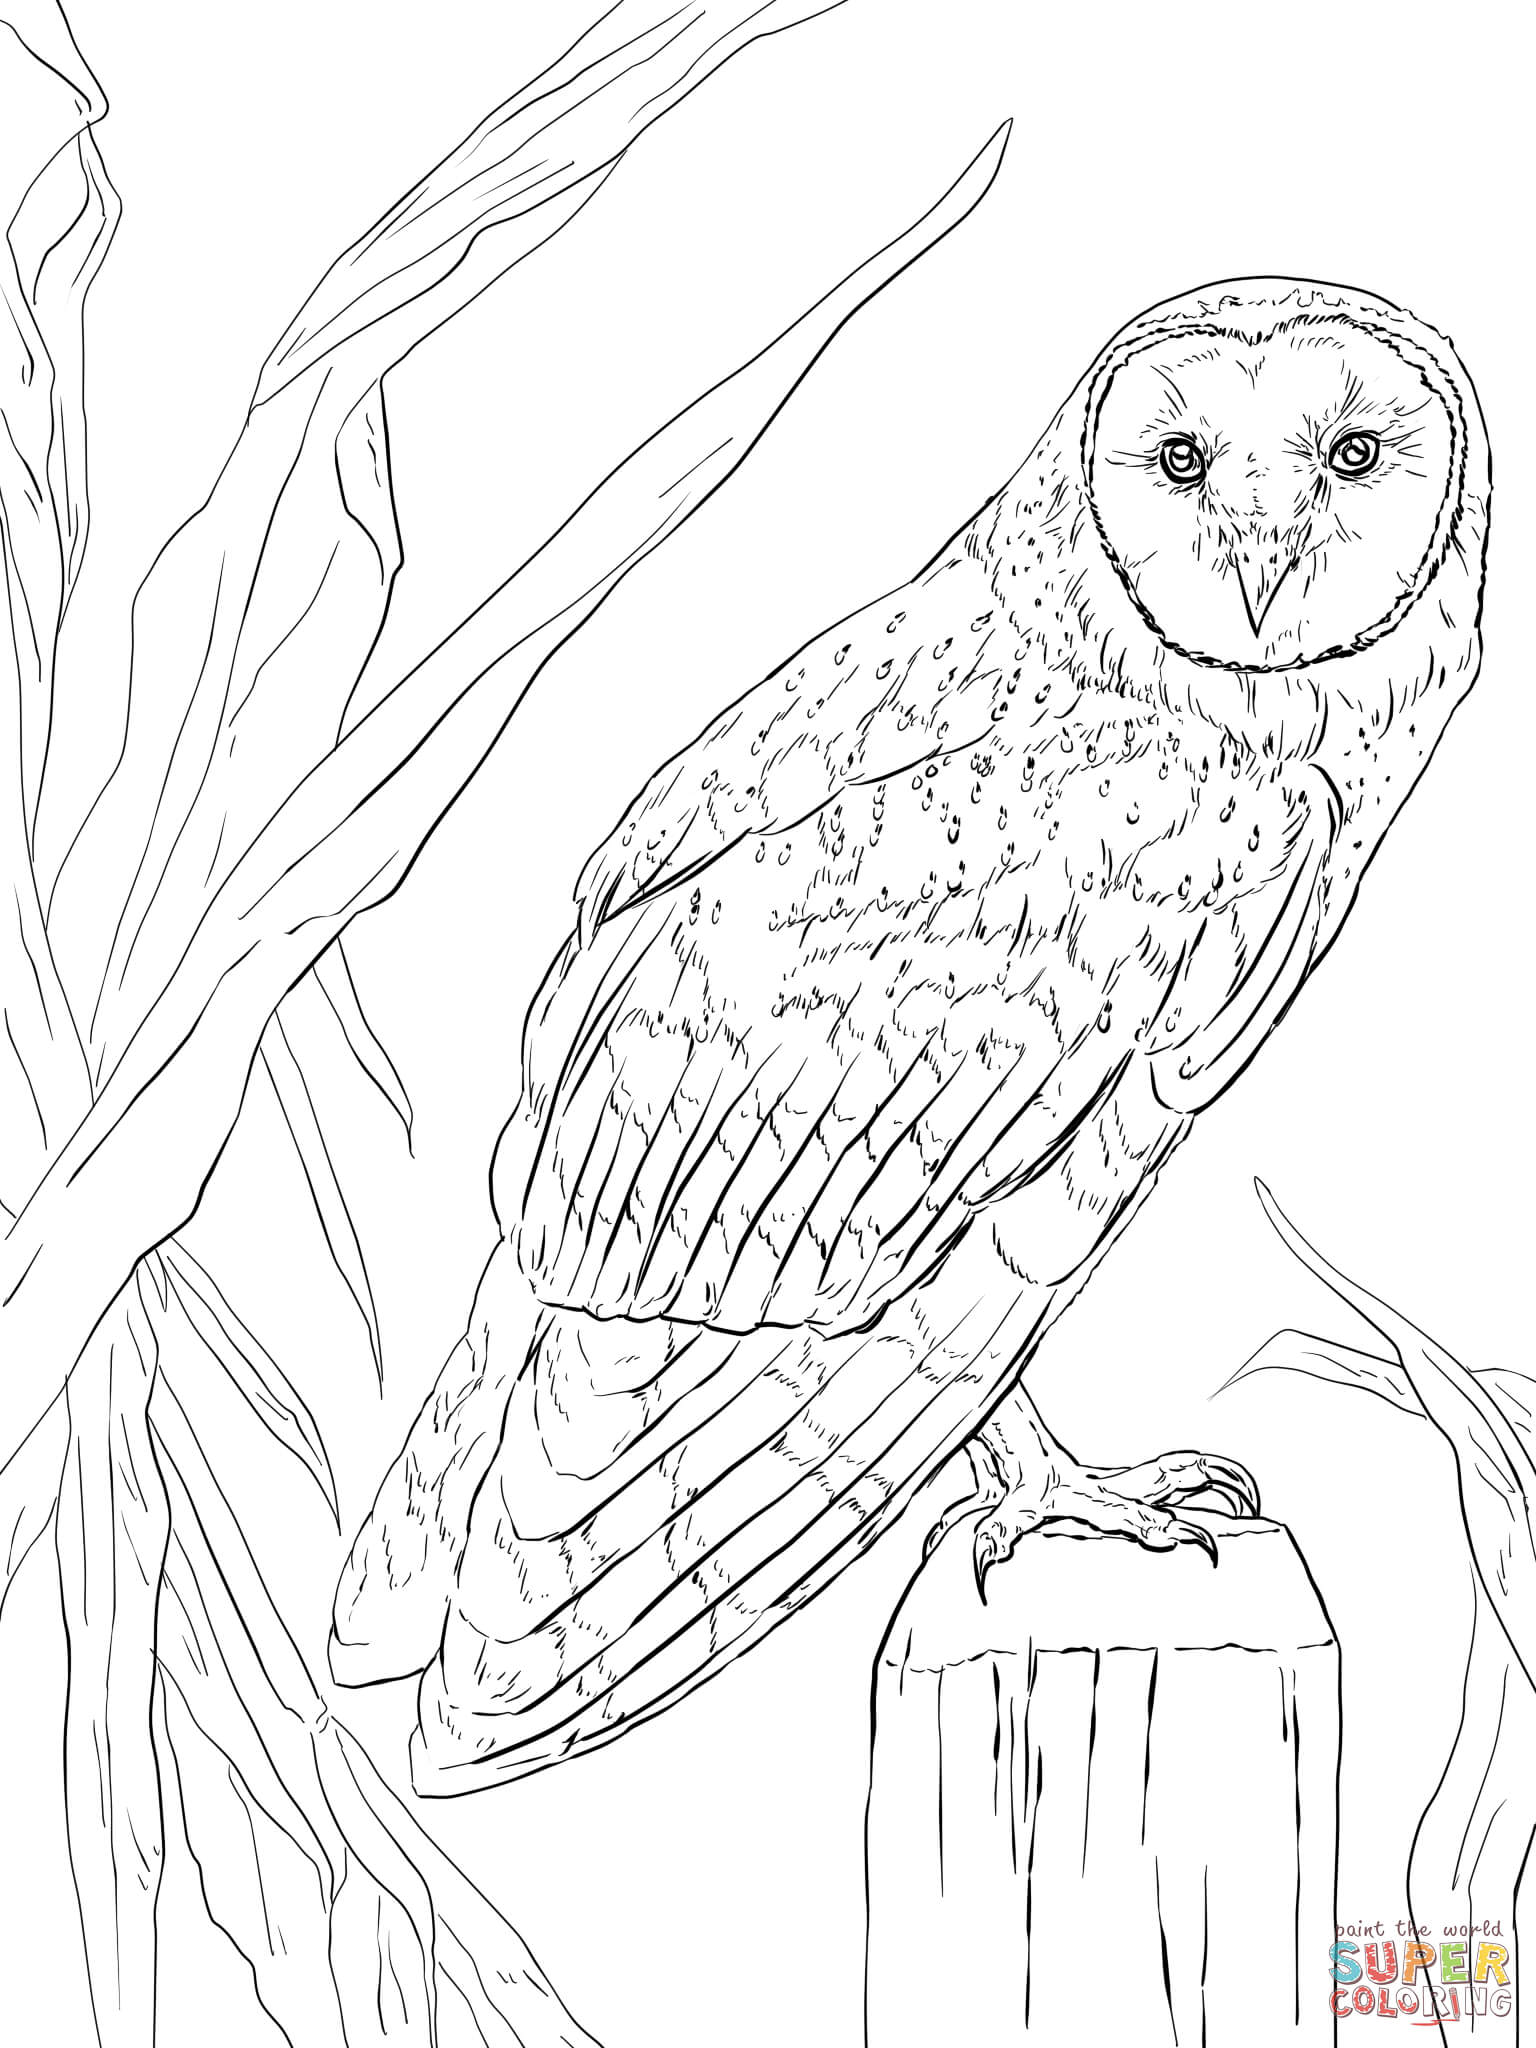 Barn Owl coloring page | Free Printable Coloring Pages